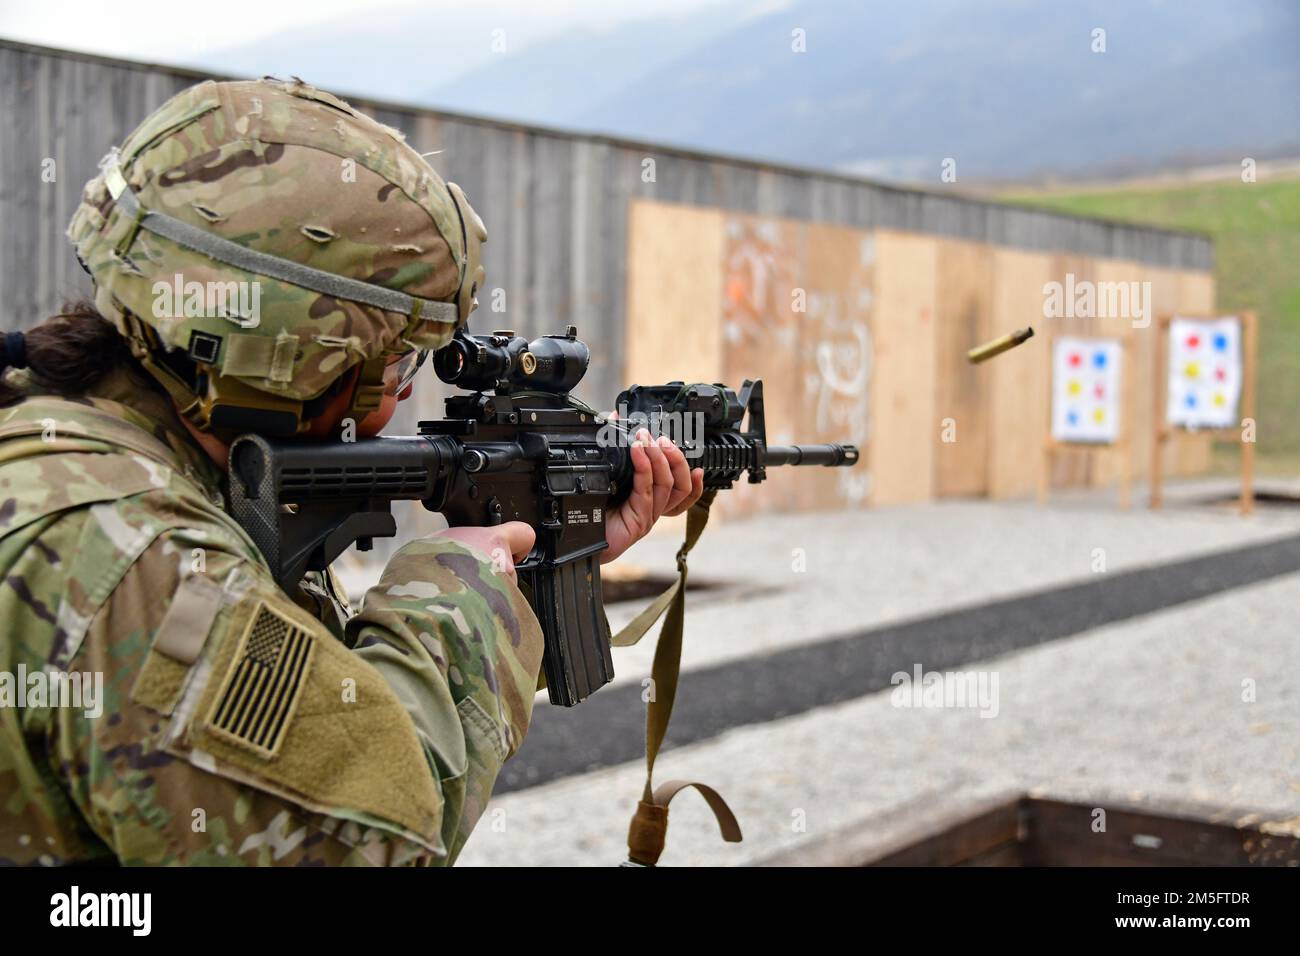 A U.S. Army Paratrooper, assigned to the 1st Battalion, 503rd Infantry Regiment, 173rd Airborne Brigade, engages targets with  an M4 carbine during marksmanship training at Cao Malnisio Range, Pordenone, Italy, March 15, 2022. The 173rd Airborne Brigade is the U.S. Army’s Contingency Response Force in Europe, providing rapidly deployable forces to United States European, African, and Central Command areas of responsibility. Stock Photo